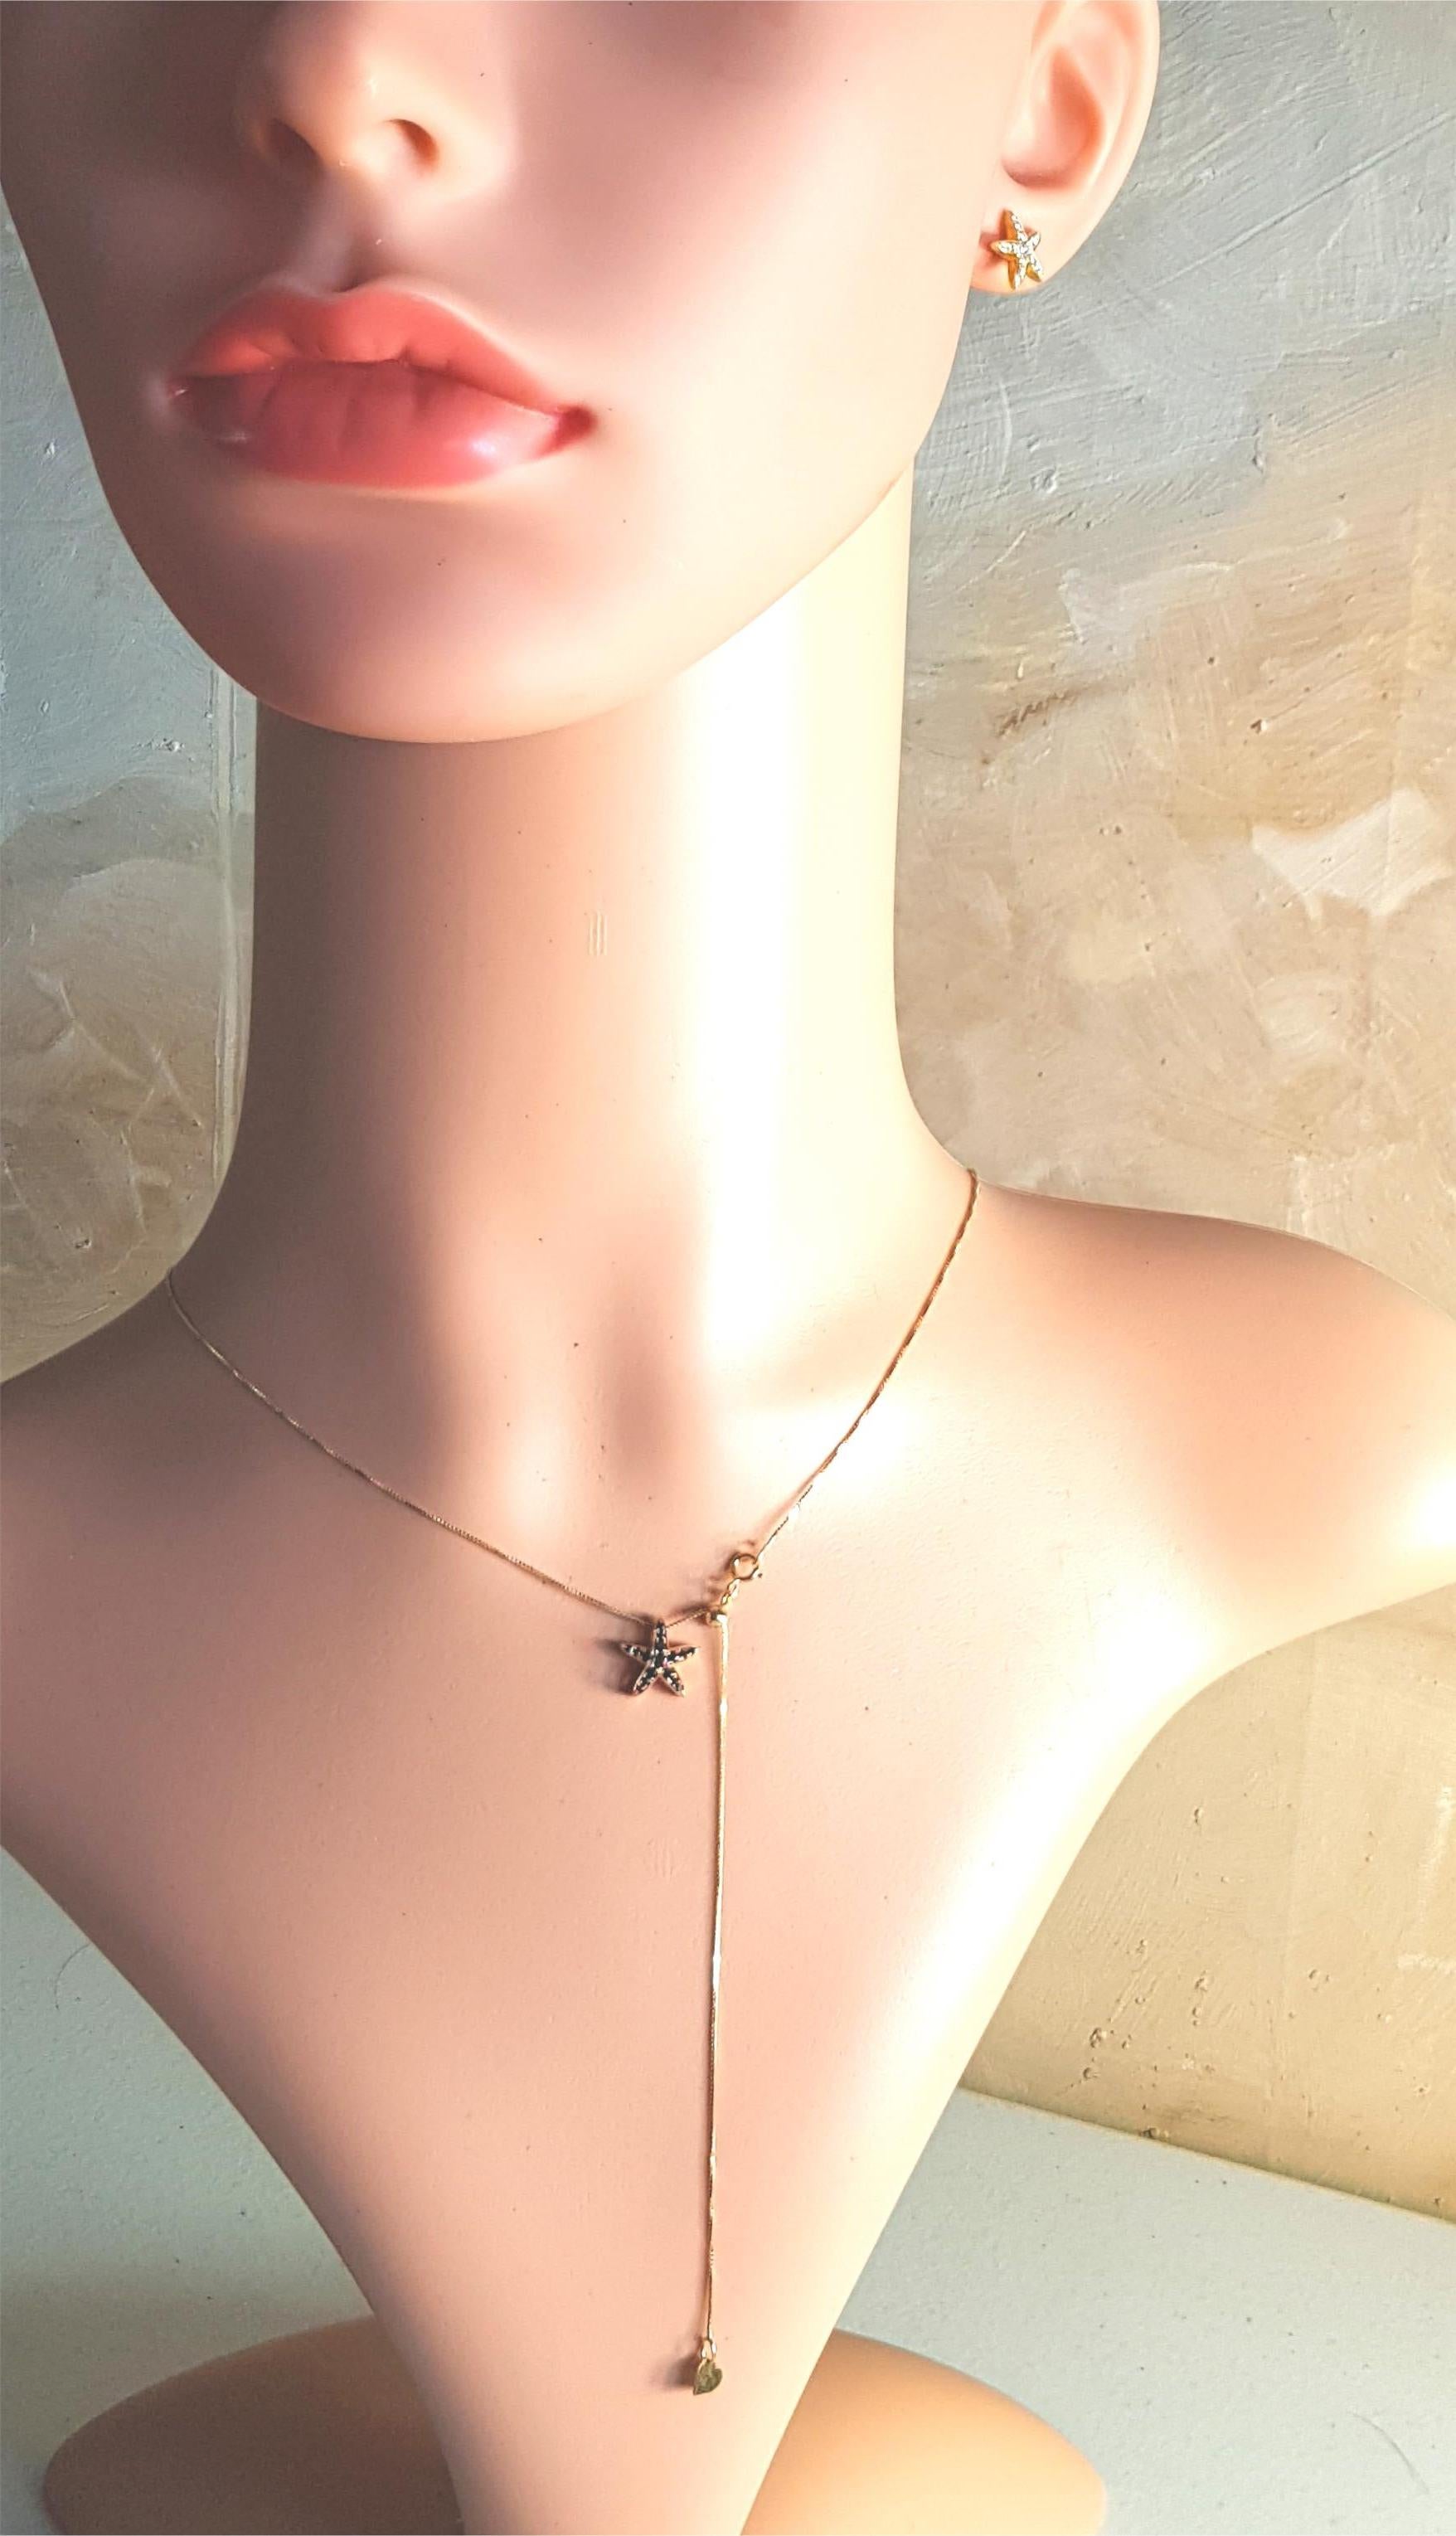 Black Diamond Sea Star Pendant and Movable Tie Chain 18 Karat Rose Gold For Sale 2